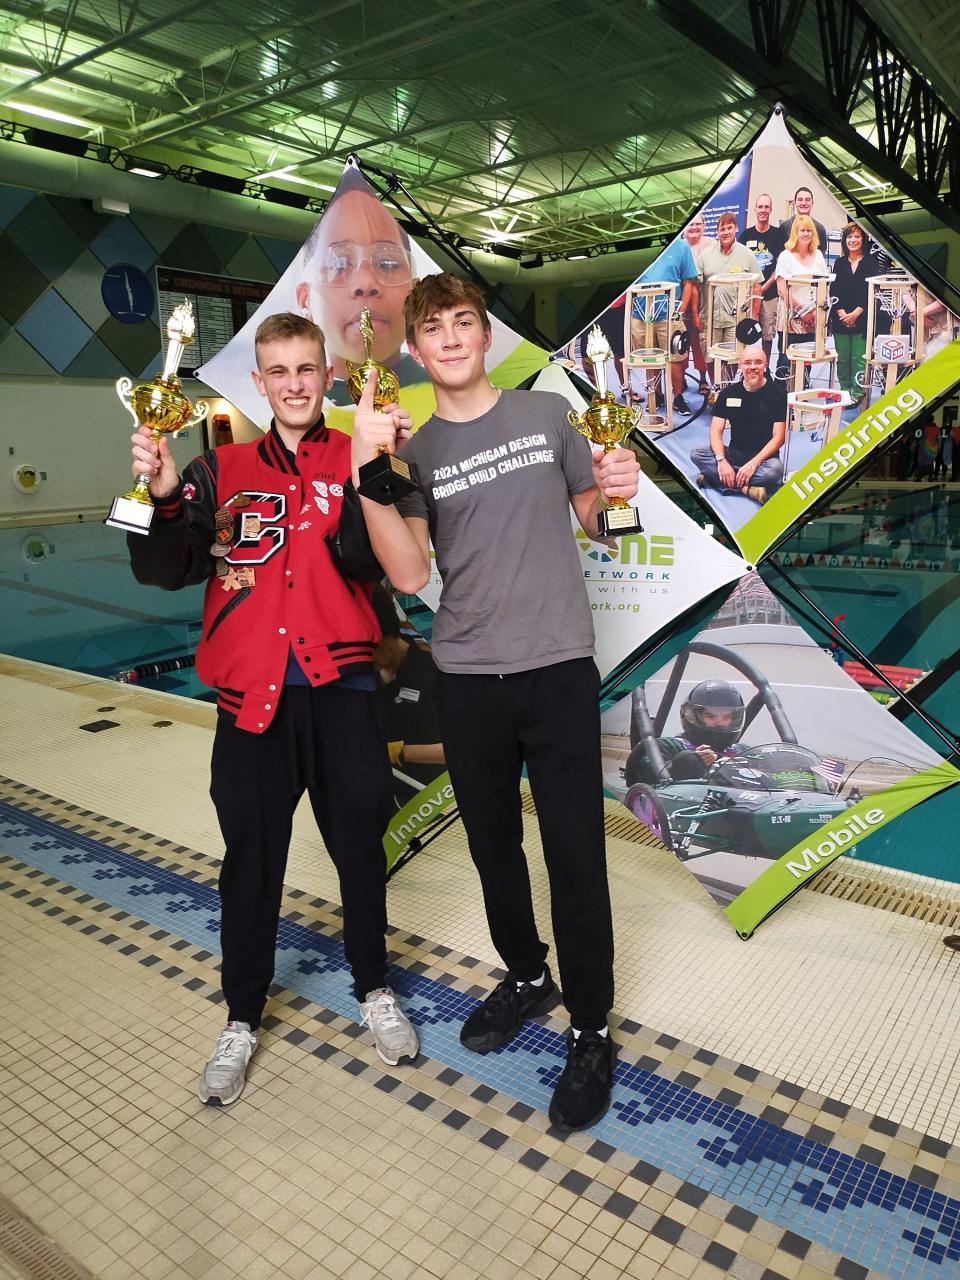 Gabe Manchester, left, and Jaren Settles, right, students at Clinton High School are seen March 20, 2024, celebrating and holding up their trophies after winning first place in the Ambassador Project, first place in the Perfect Pitch competition and first place for Overall Performance in the Senior Division during an underwater robotics competition hosted at the Charlotte Aquatic Center.